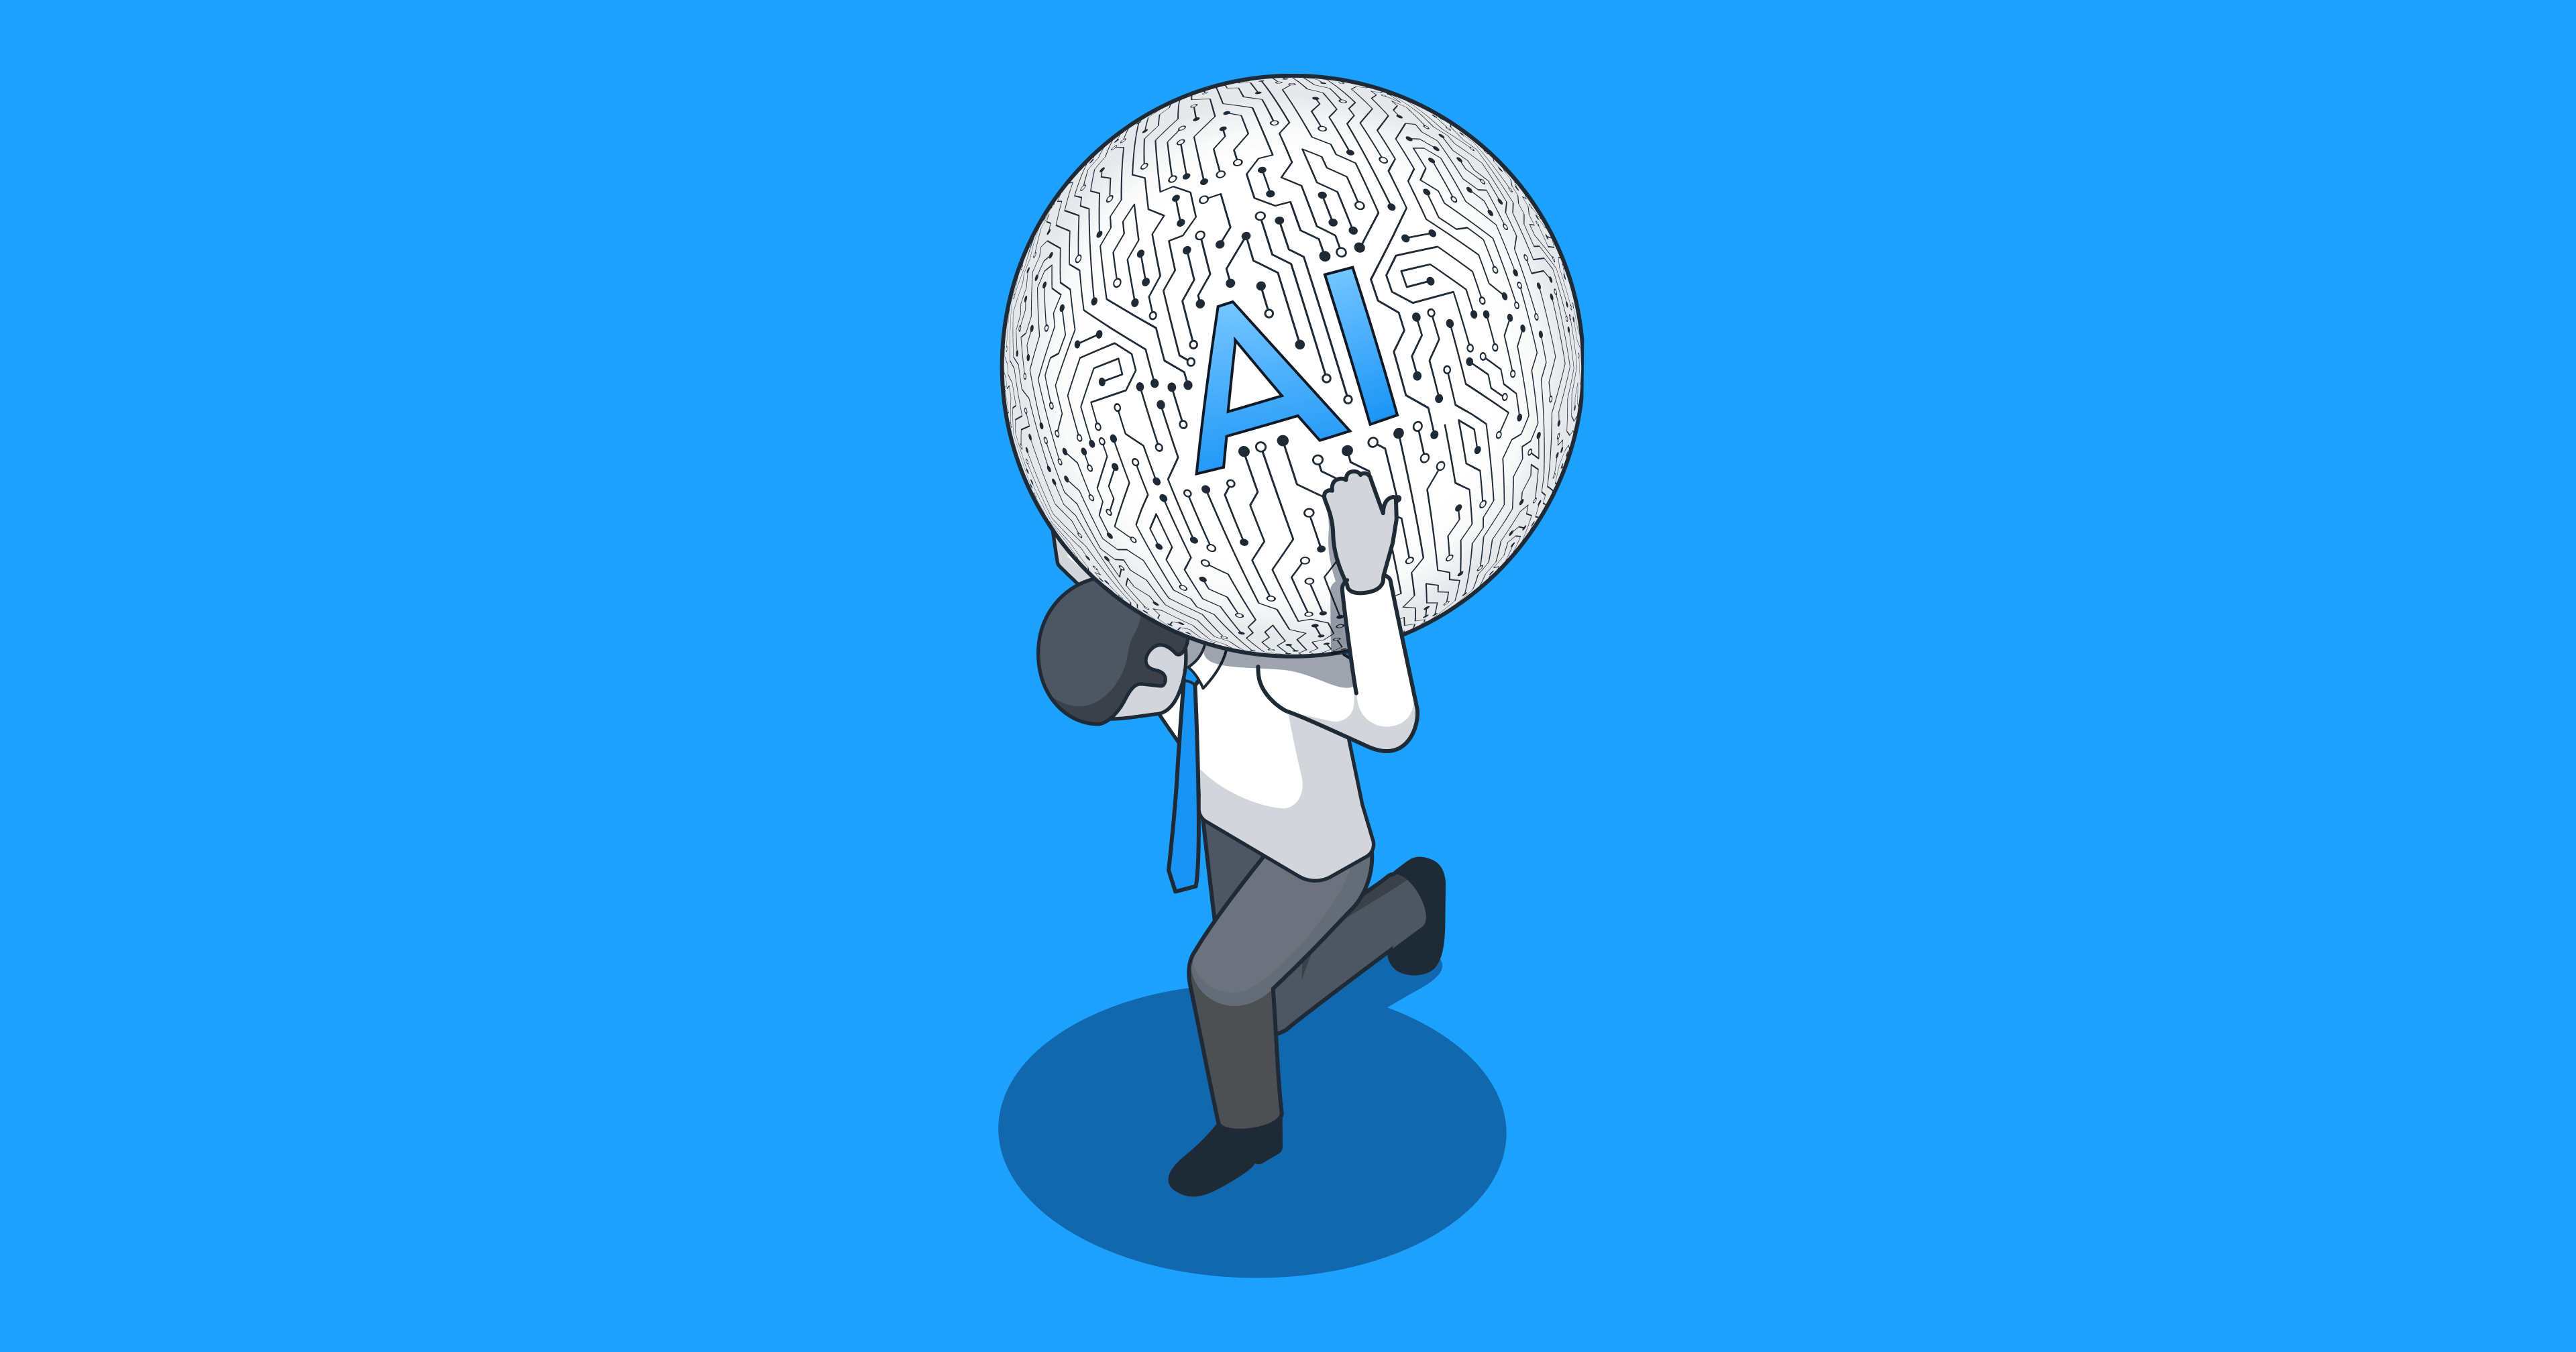 An illustration of a man holding a boulder on his back. The boulder is labeled "AI."